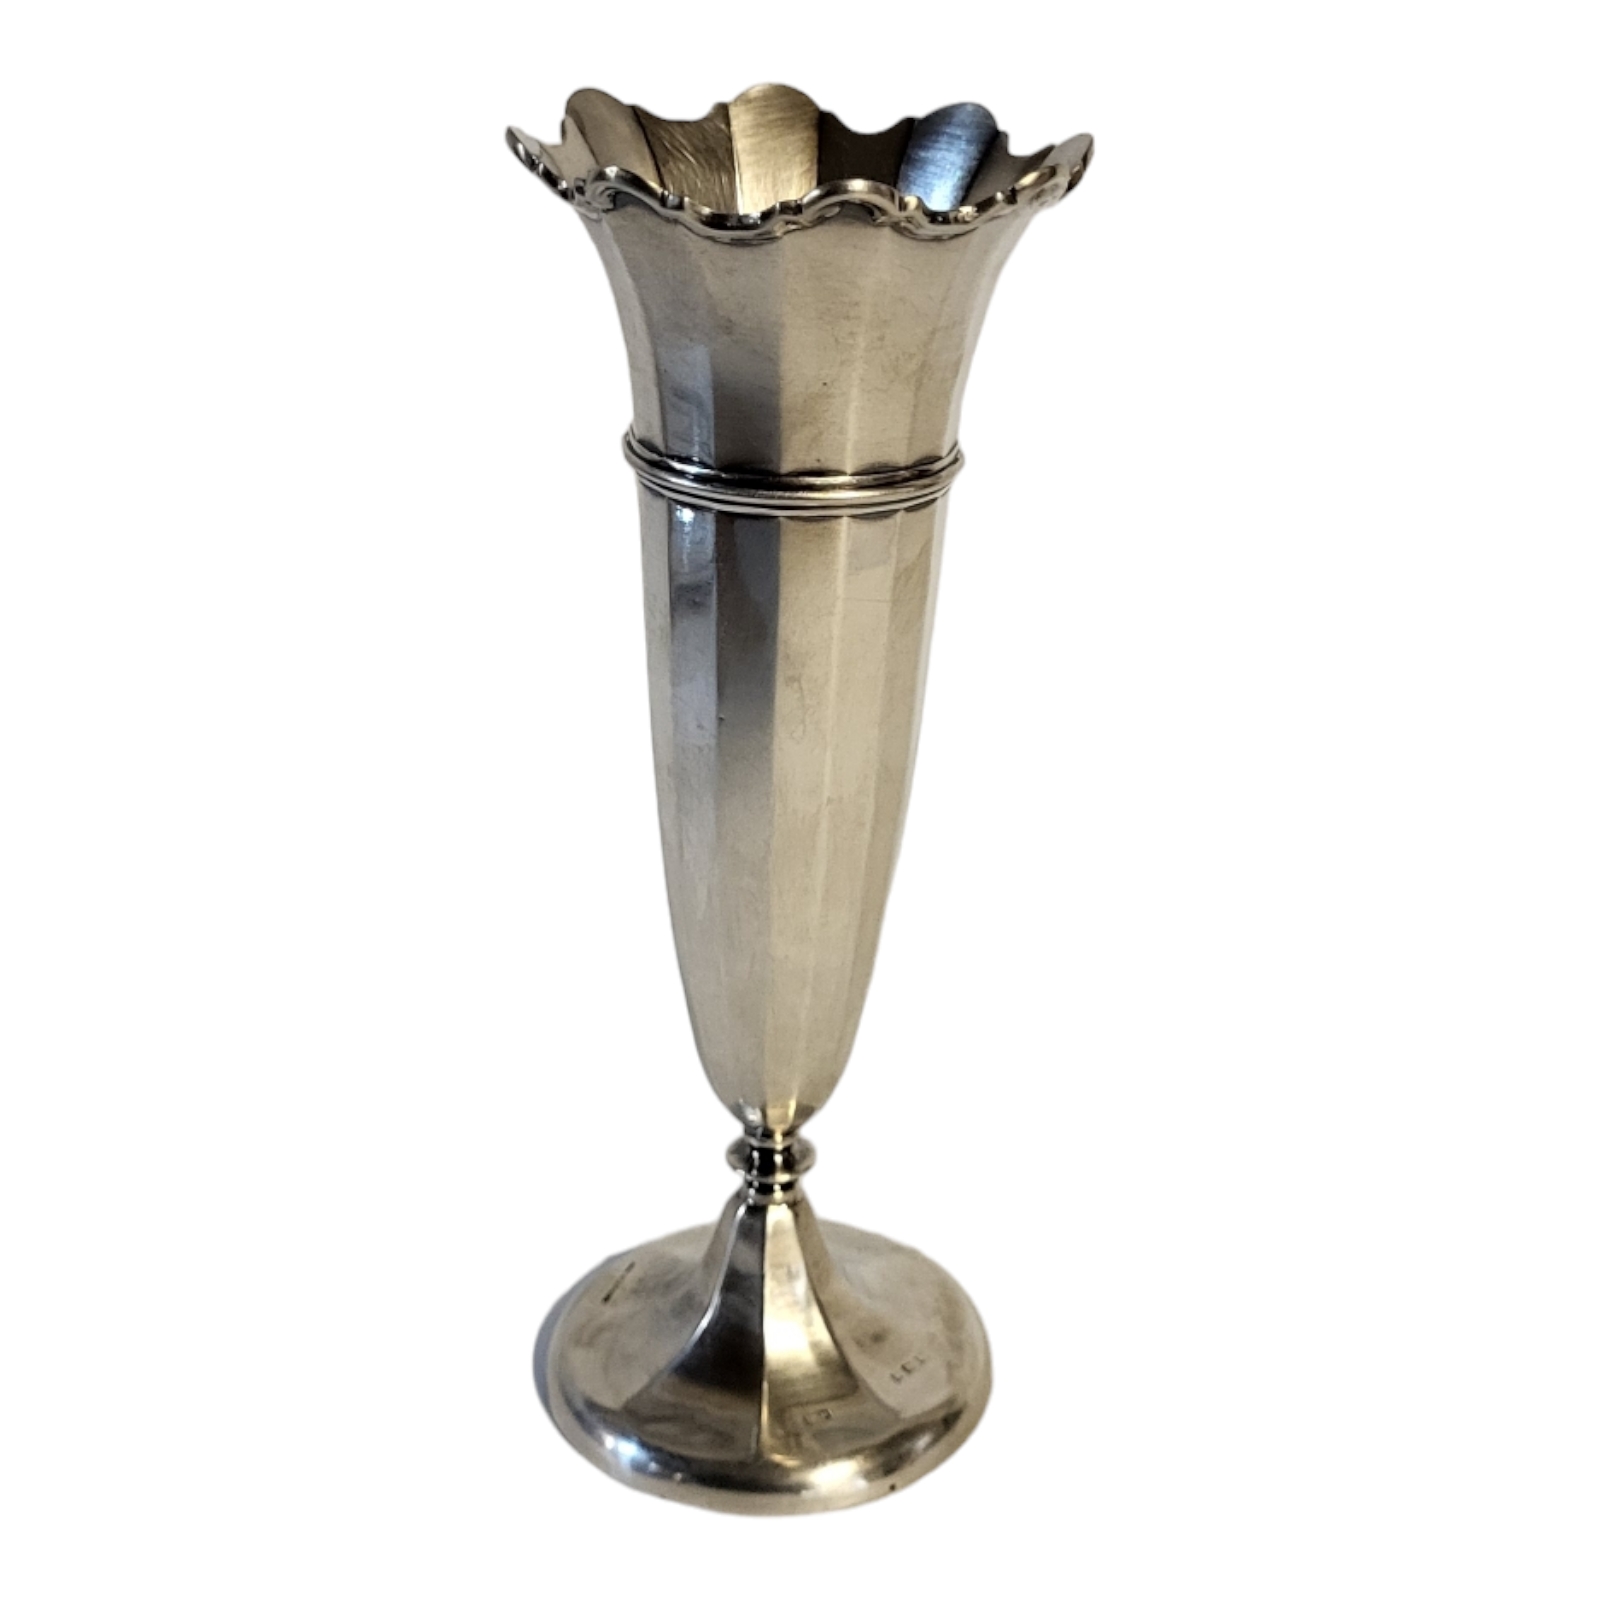 AN EARLY 20TH CENTURY SILVER TRUMPET VASE Having a scrolled flared rim with reeded design on - Image 2 of 3